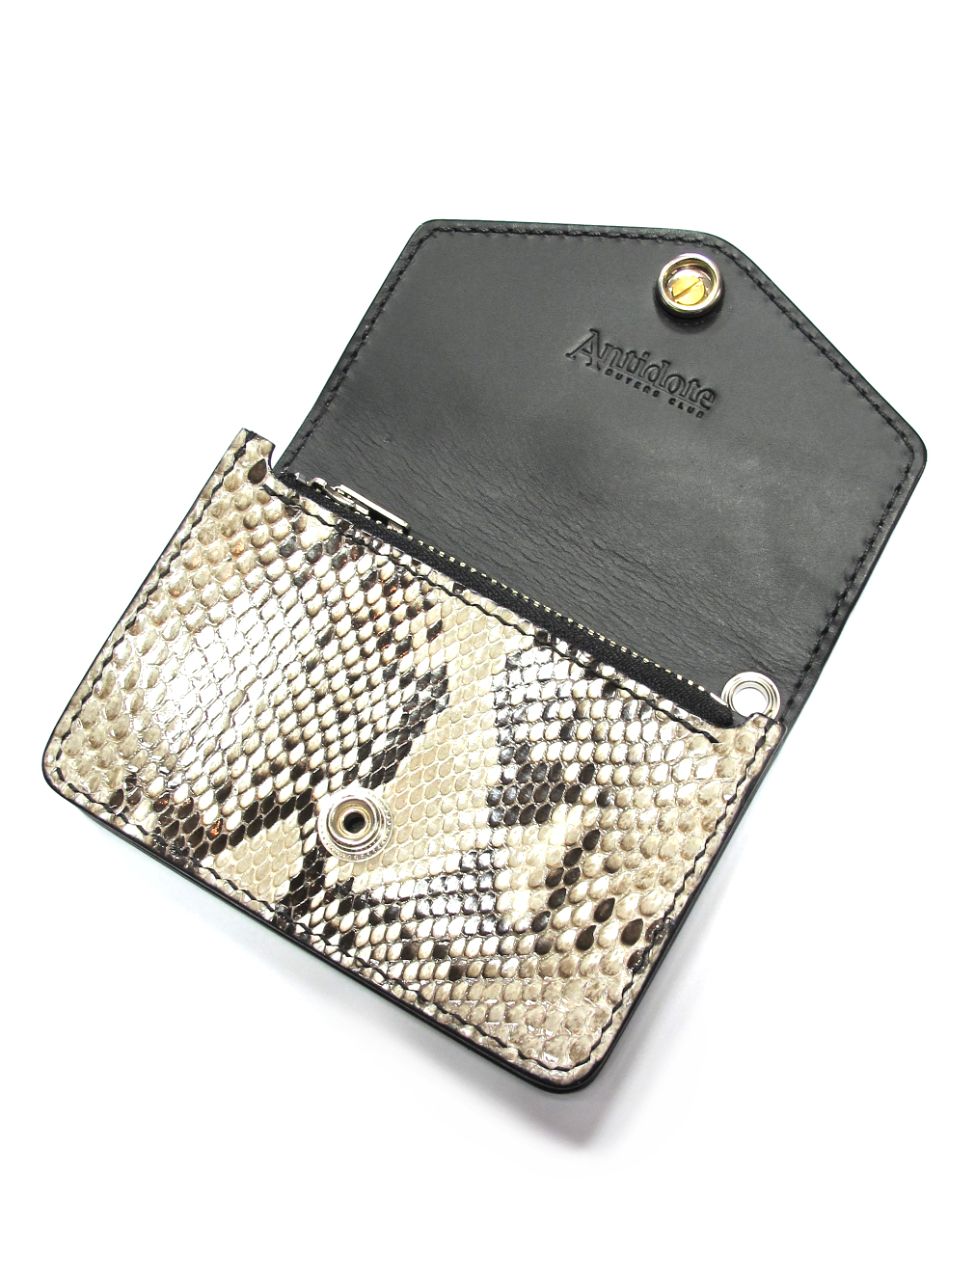 ANTIDOTE BUYERS CLUB - COMPACT TRUCKER WALLET (PYTHON 